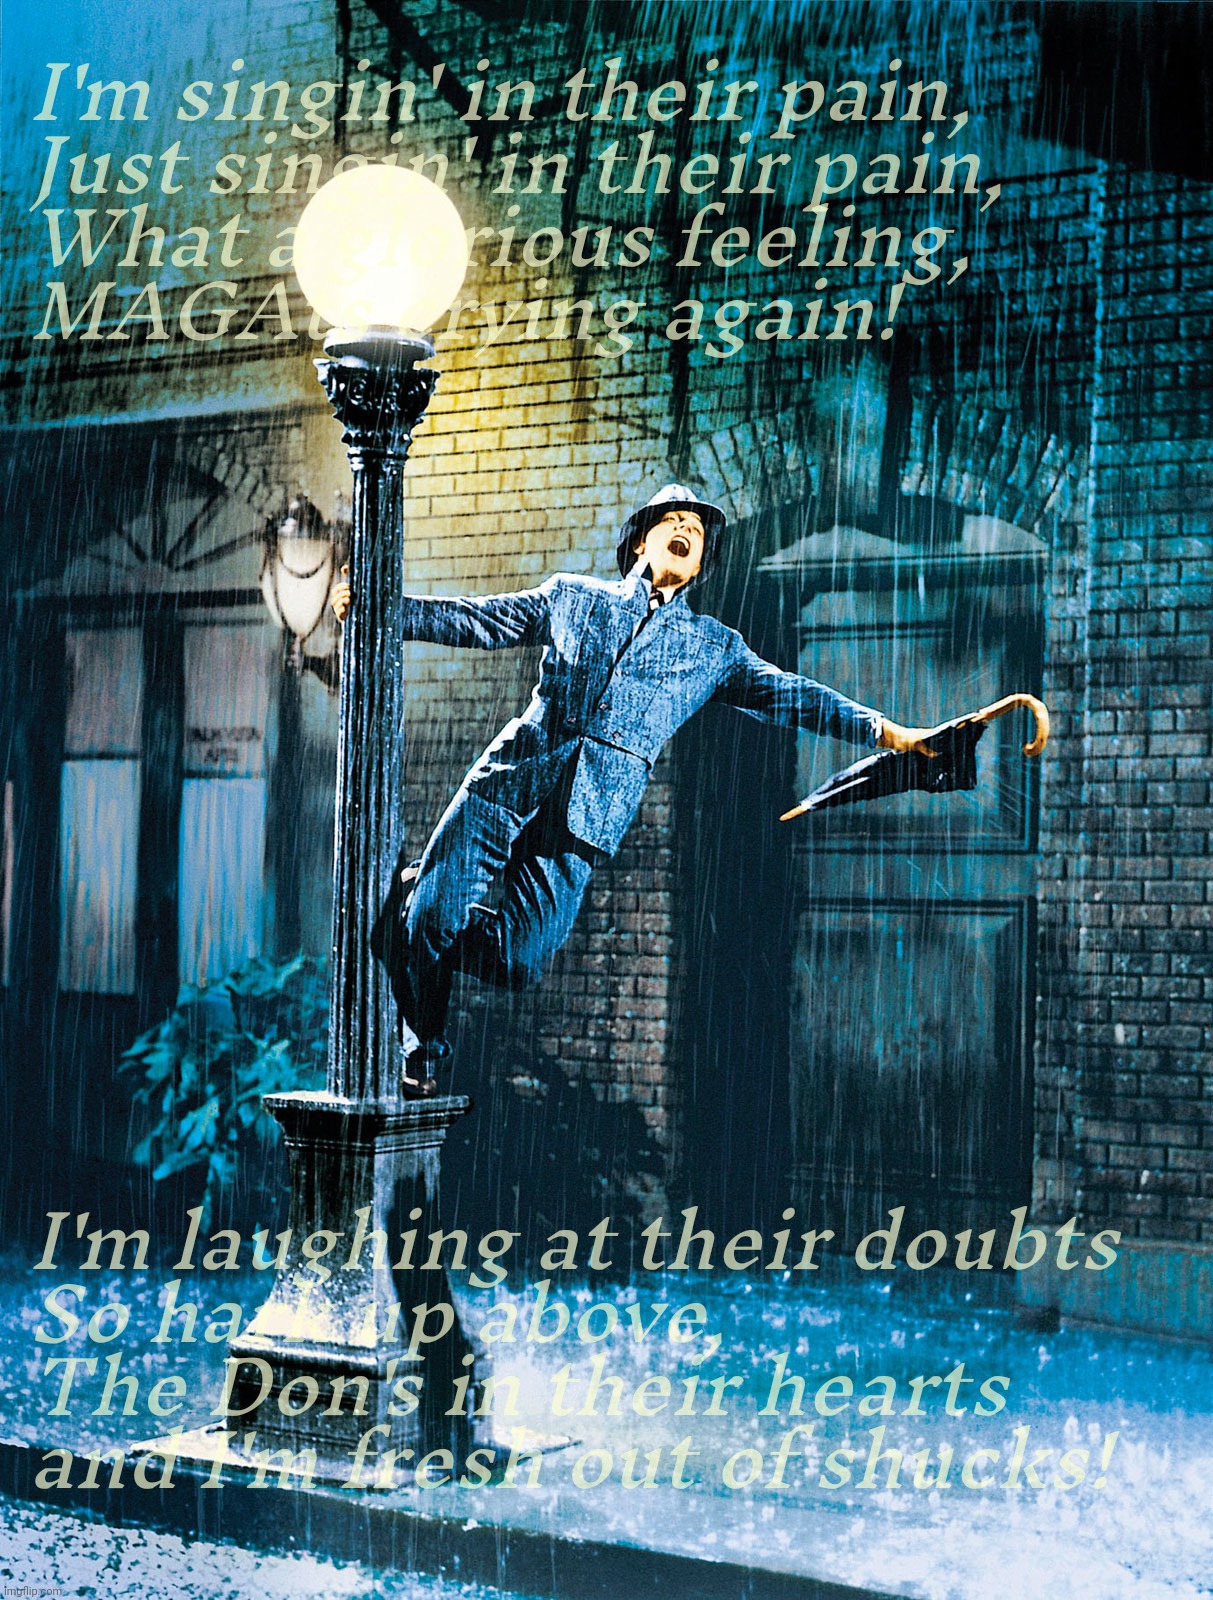 Singing in the Rain, MAGAt tears edition | I'm singin' in their pain,
Just singin' in their pain,
What a glorious feeling,
MAGAts crying again! I'm laughing at their doubts
So hark up above,
The Don's in their hearts
and I'm fresh out of shucks! | image tagged in singing in the rain,singing in their pain,magat crying again,34 counts guilty,don the con couldn't keep his silk pants on,trump | made w/ Imgflip meme maker